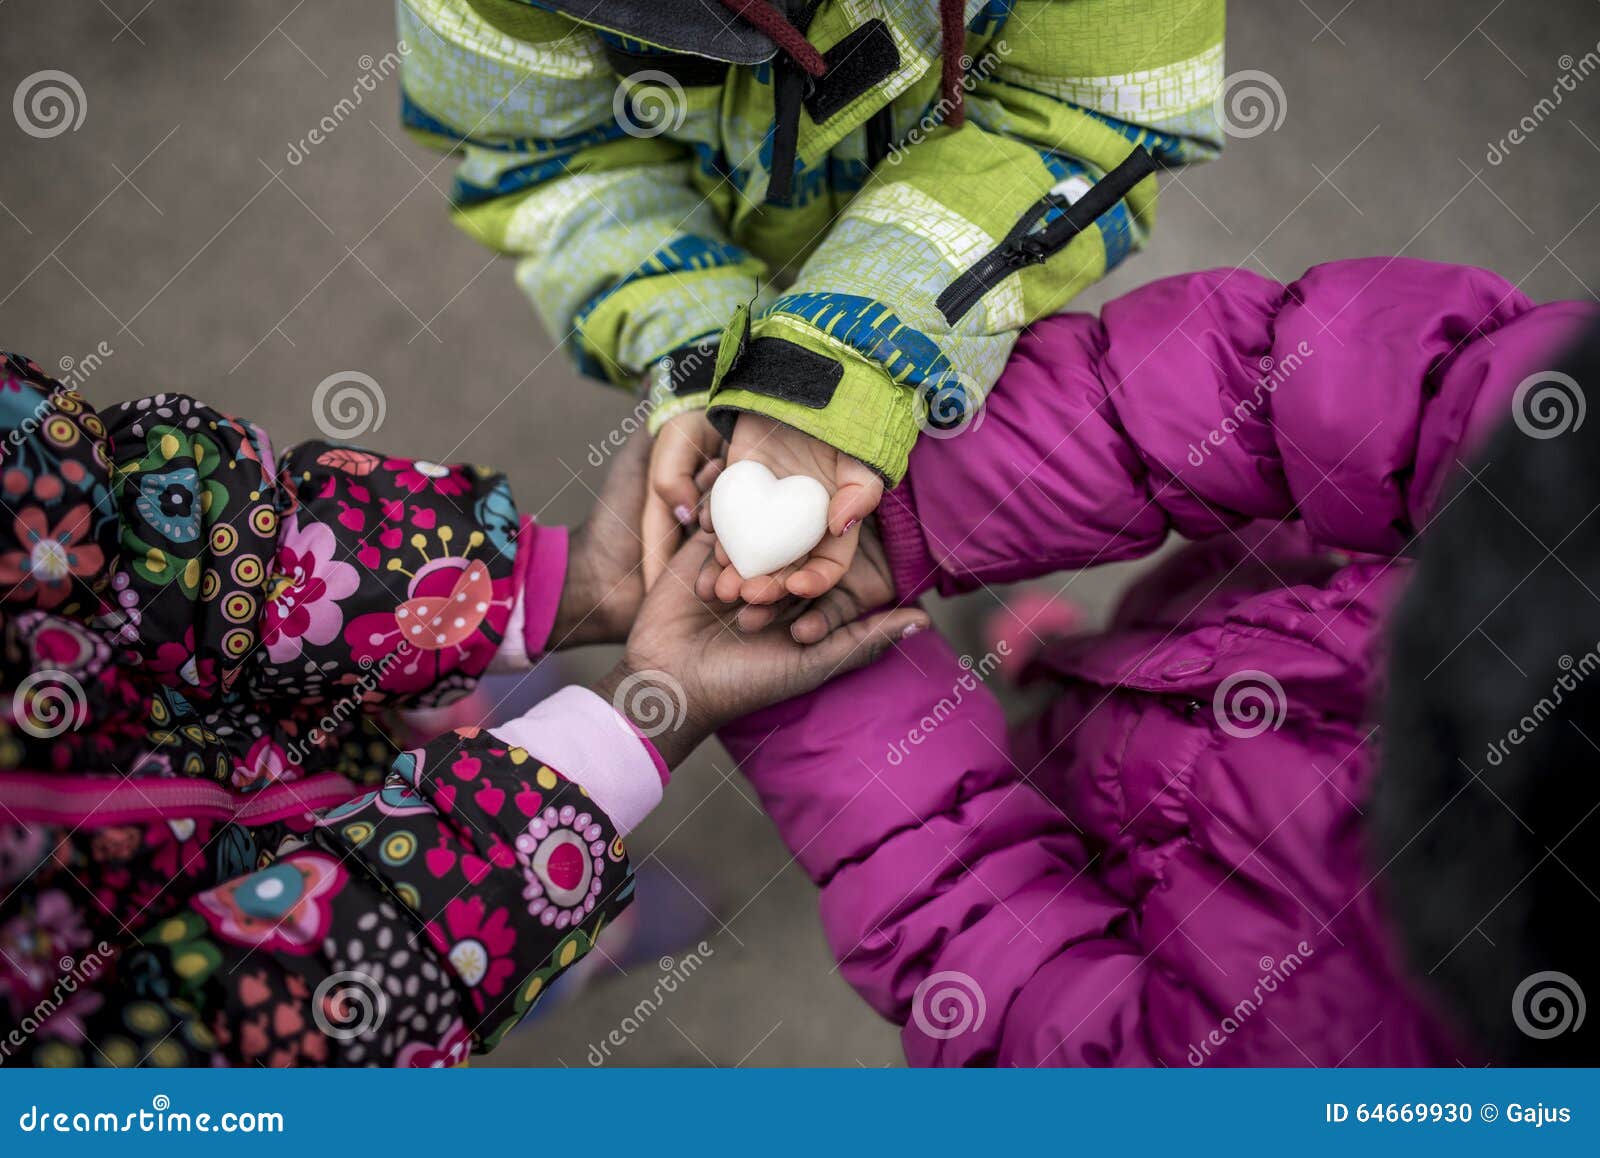 three toddler girls holding their hands joined together with the